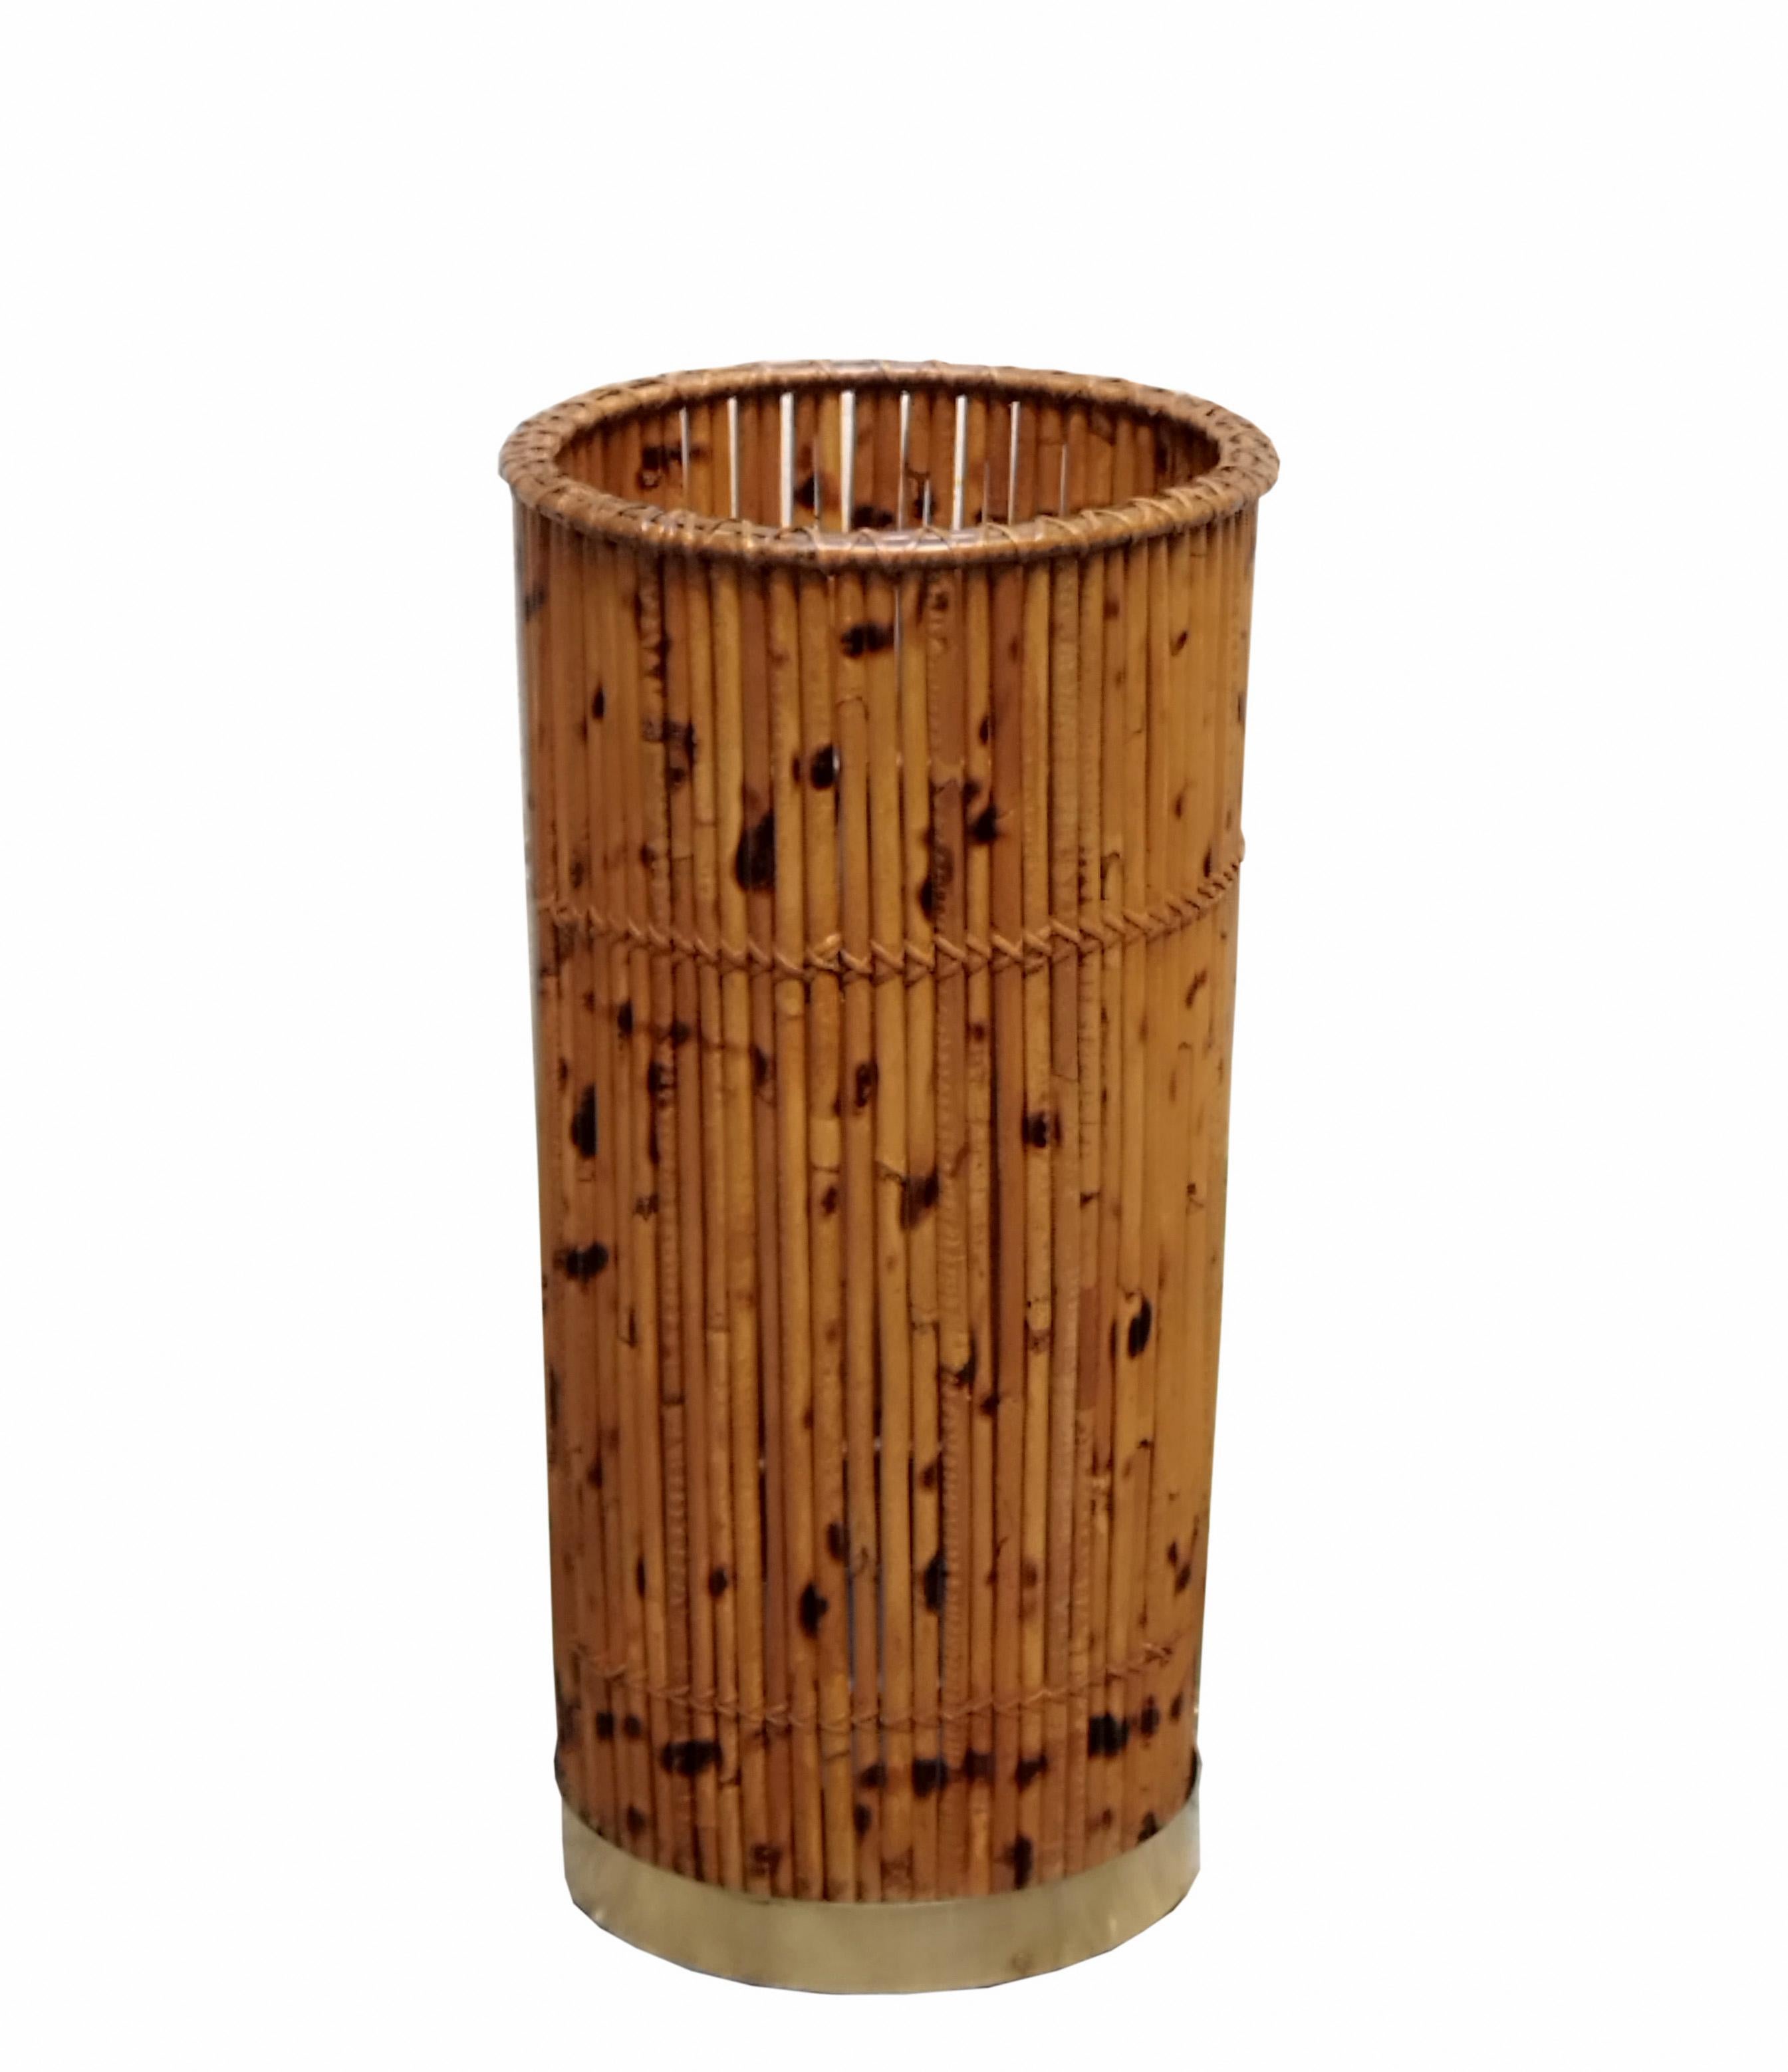 Gorgeous rattan and brass umbrella stand made in Italy in the 1970s. With its round shape and mid-century modern style, it is inspired by the designs of Gabriella Crespi and Vivai del Sud.It is made of natural rattan with brass appliqués on the top